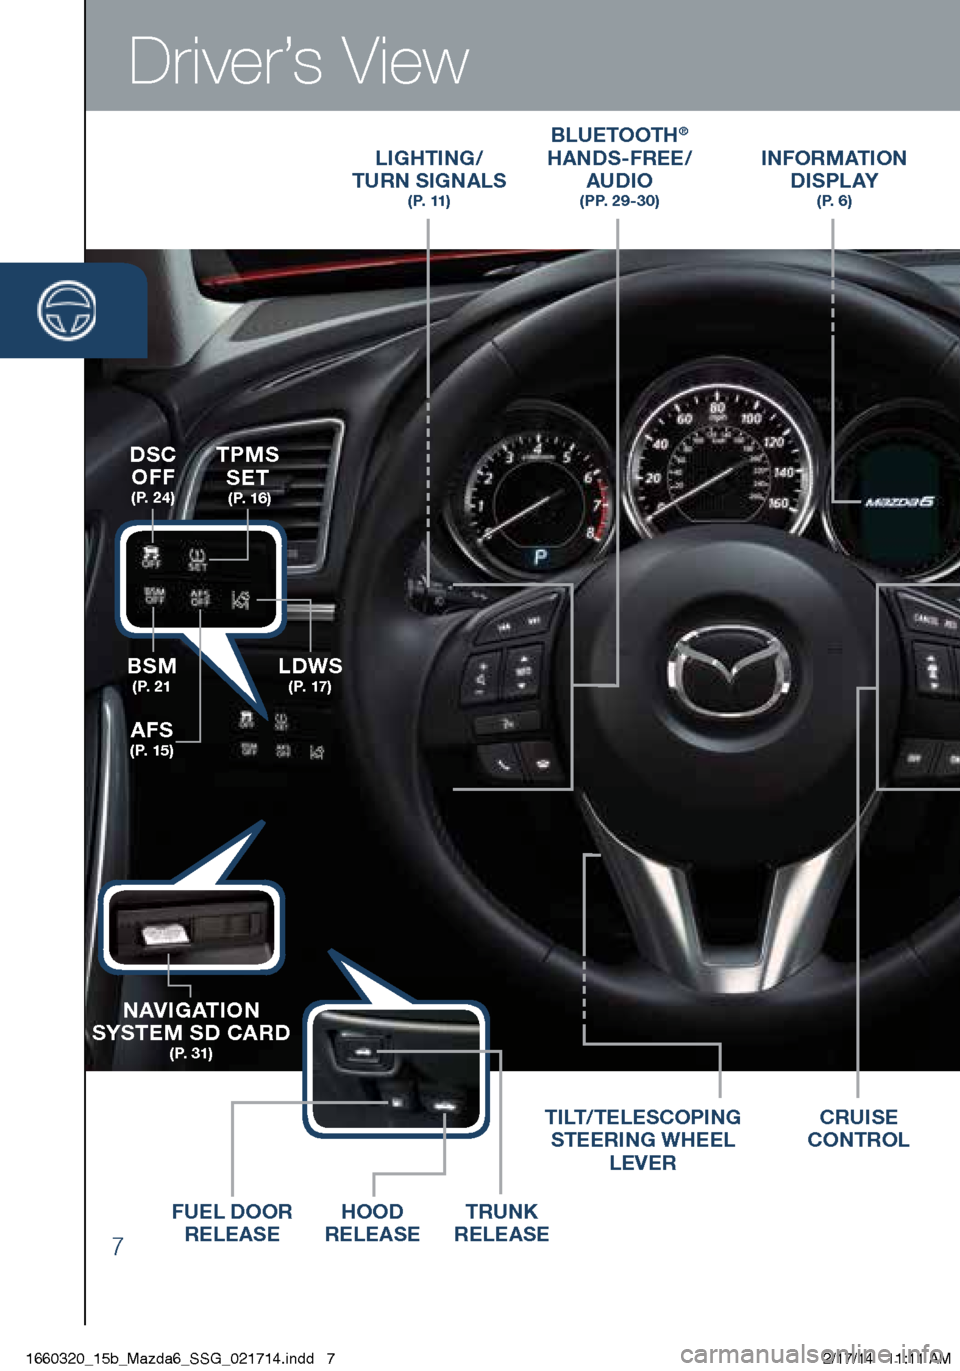 MAZDA MODEL 6 2015  Smart Start Guide (in English) 7
Driver’s View
LIGHTING/  
TURN SIGNALS  
( P.  11 )
BLUETOOTH®  
HANDS-FREE/  
AUDIO
  ( P P.  2 9 - 3 0 )
INFORMATION  D I S P L AY  
( P.  6 )
TRUNK 
RELEASE
HOOD 
RELEASE
FUEL DOOR 
RELEASE TI